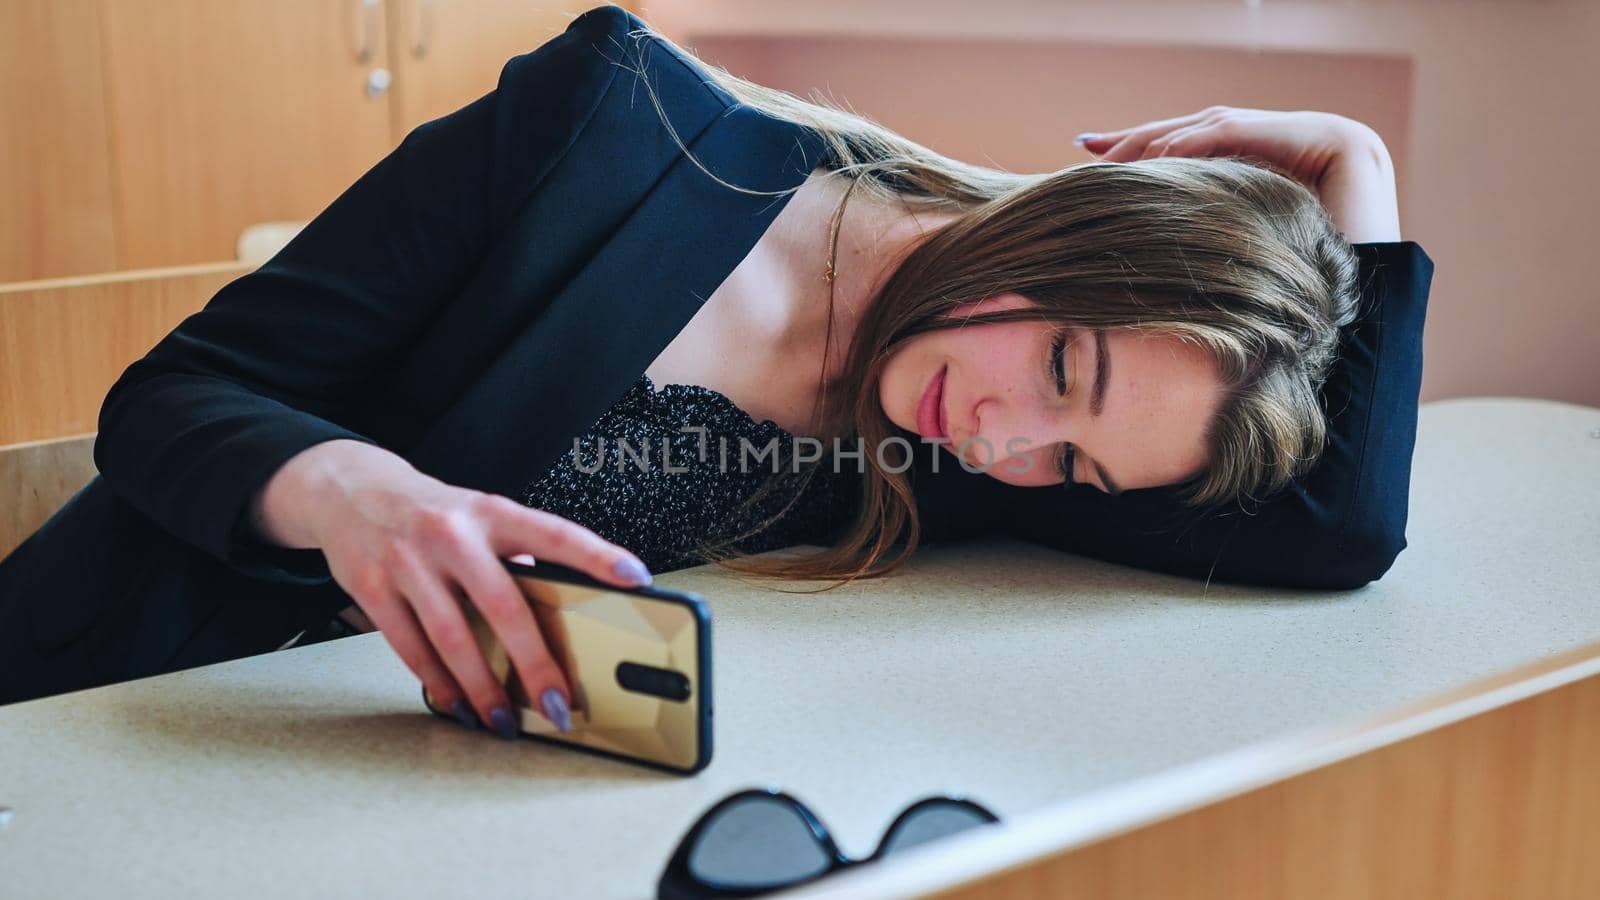 A tired student lying on her desk looks at her smartphone and then smiles. by DovidPro